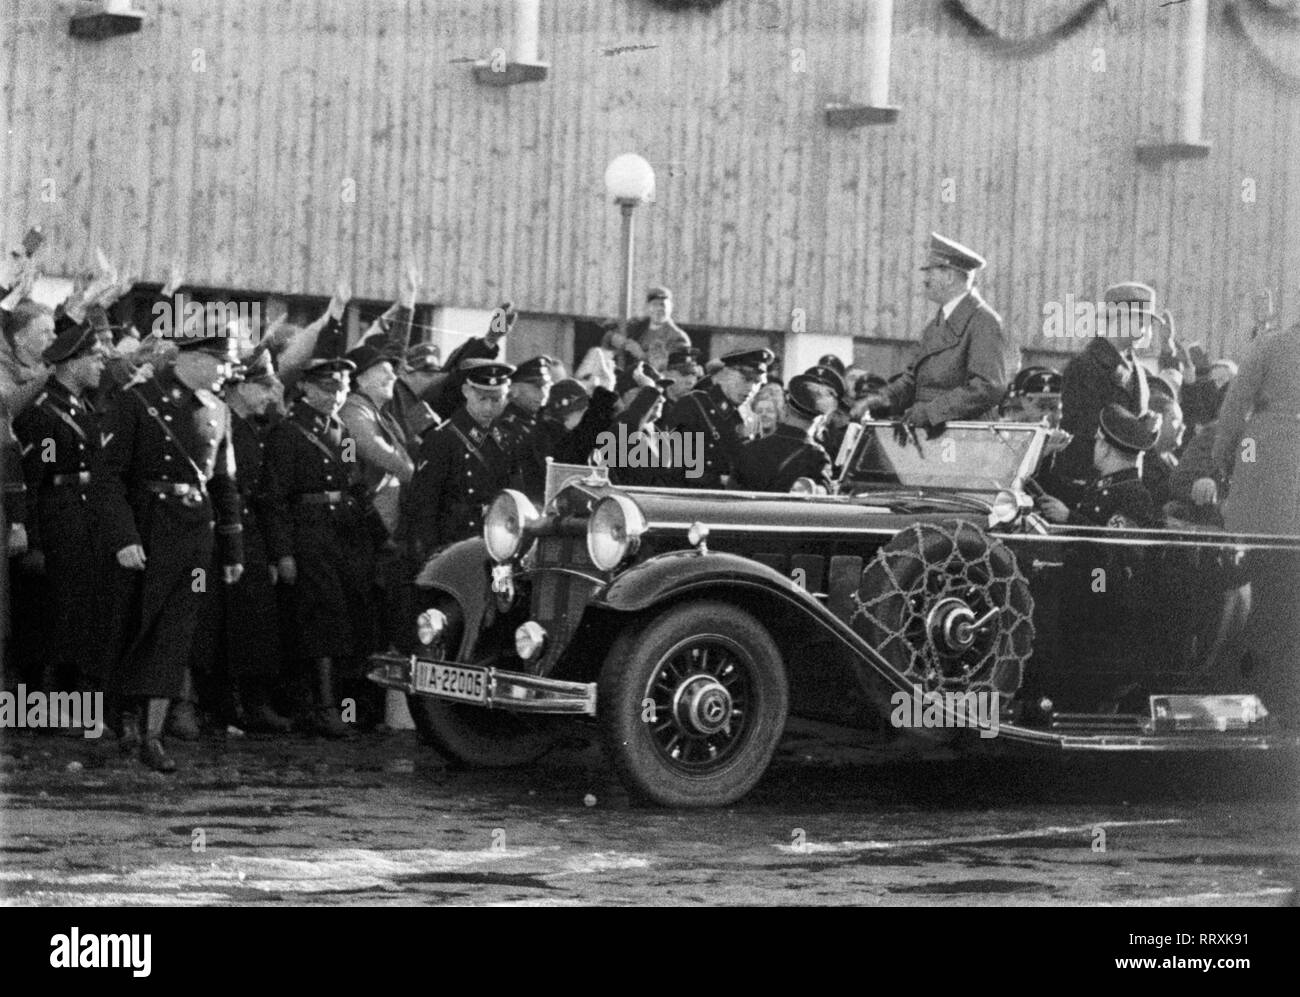 Winter Olympics - Germany, Third Reich - Olympic Winter Games, Winter Olympics 1936 in Garmisch-Partenkirchen, Reich Chancellor Adolf Hitler - arrival to the opening ceremony. Image date  February 1936. Photo Erich Andres Stock Photo